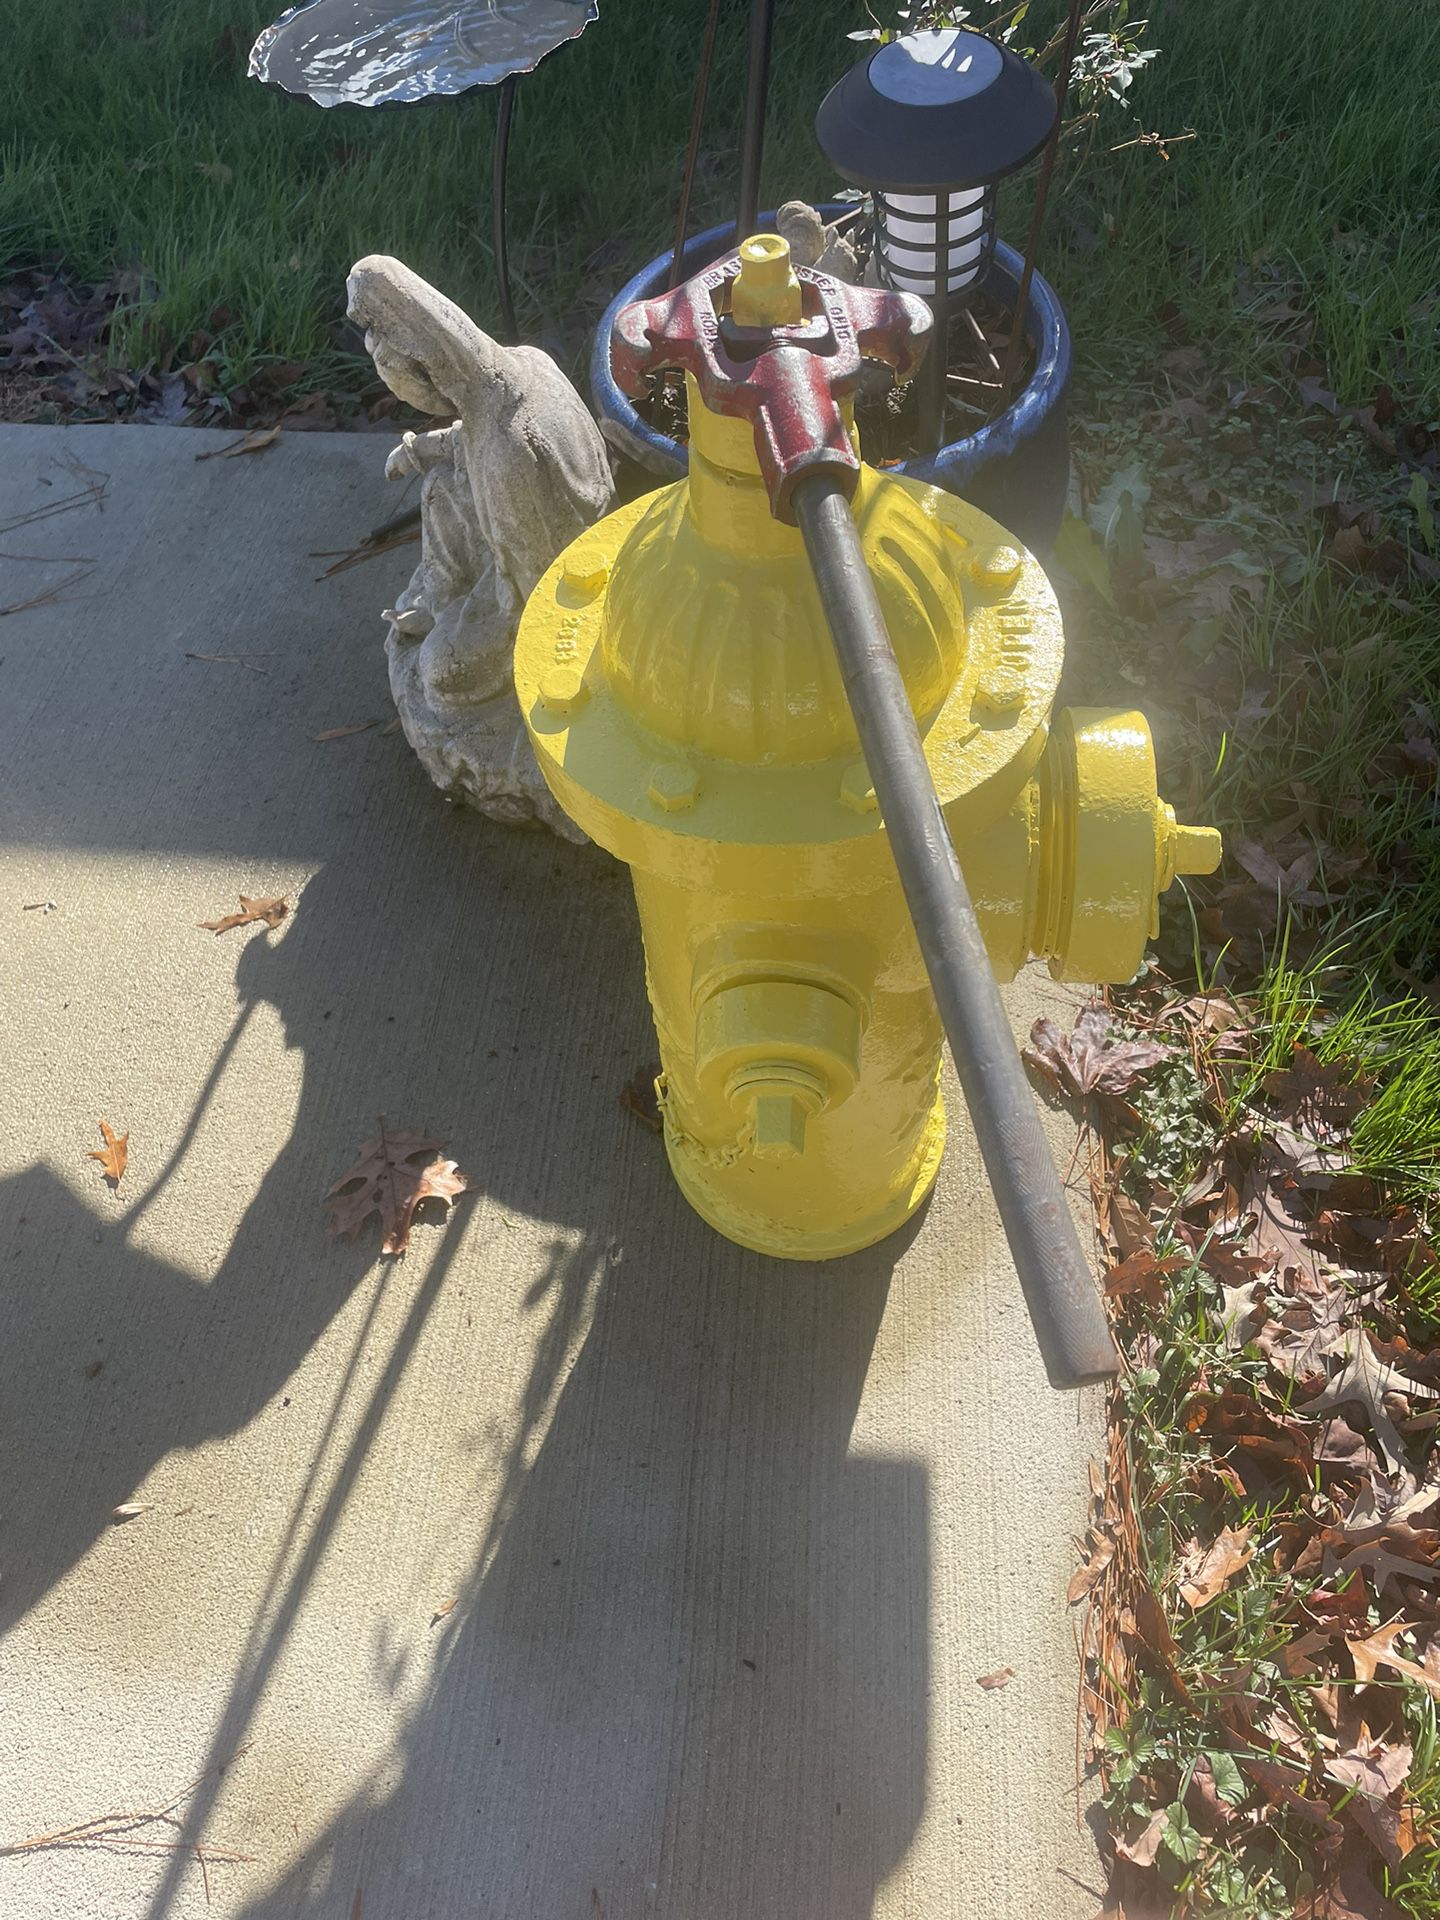 Eddy Valve Co. Vintage Fire Hydrant.with wrench  Approximately 31 inches tall very heavy  